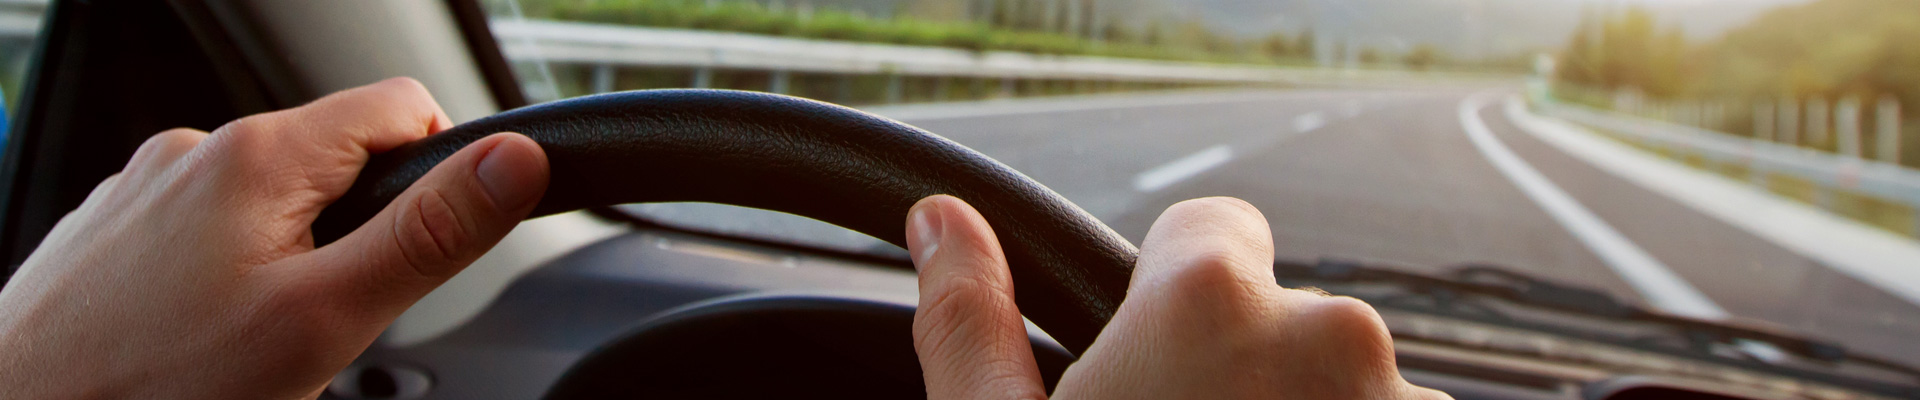 image of a steering wheel with a hand on it